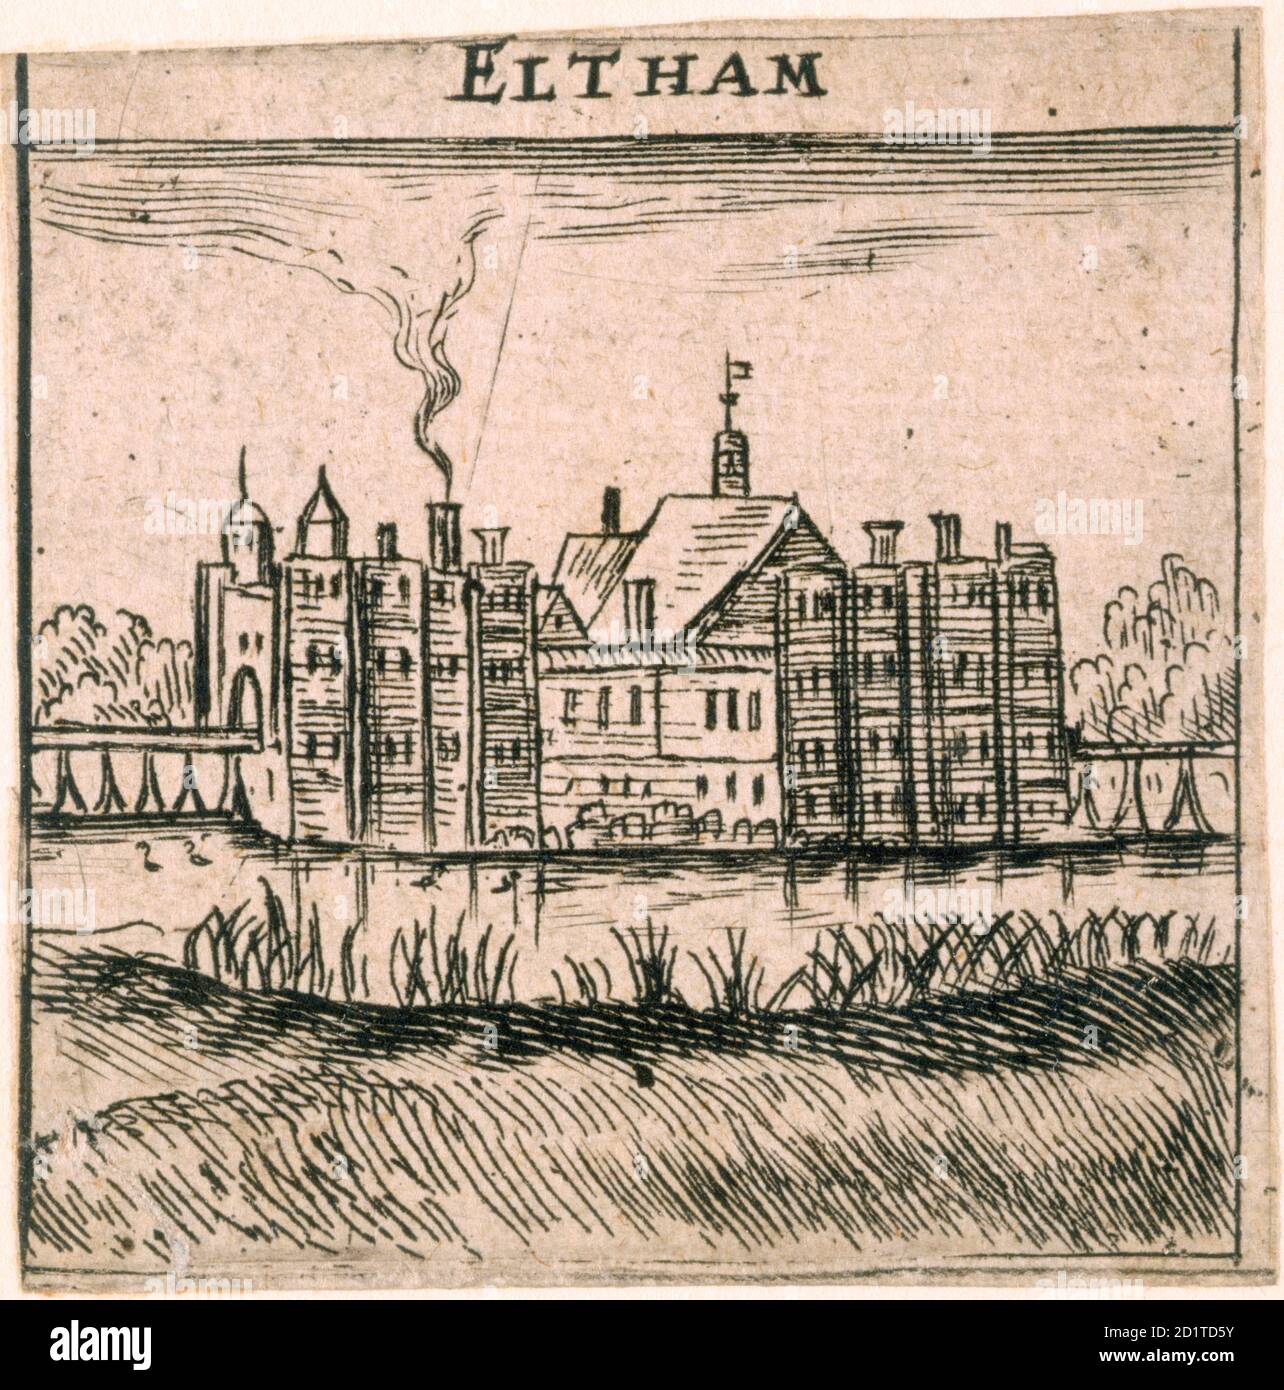 ELTHAM PALACE, London. A view, said to be by Peter Stent, of Eltham Palace just before the major demolitions in the 1650s. The queen's apartments are to the left and the king's to the right. Stock Photo